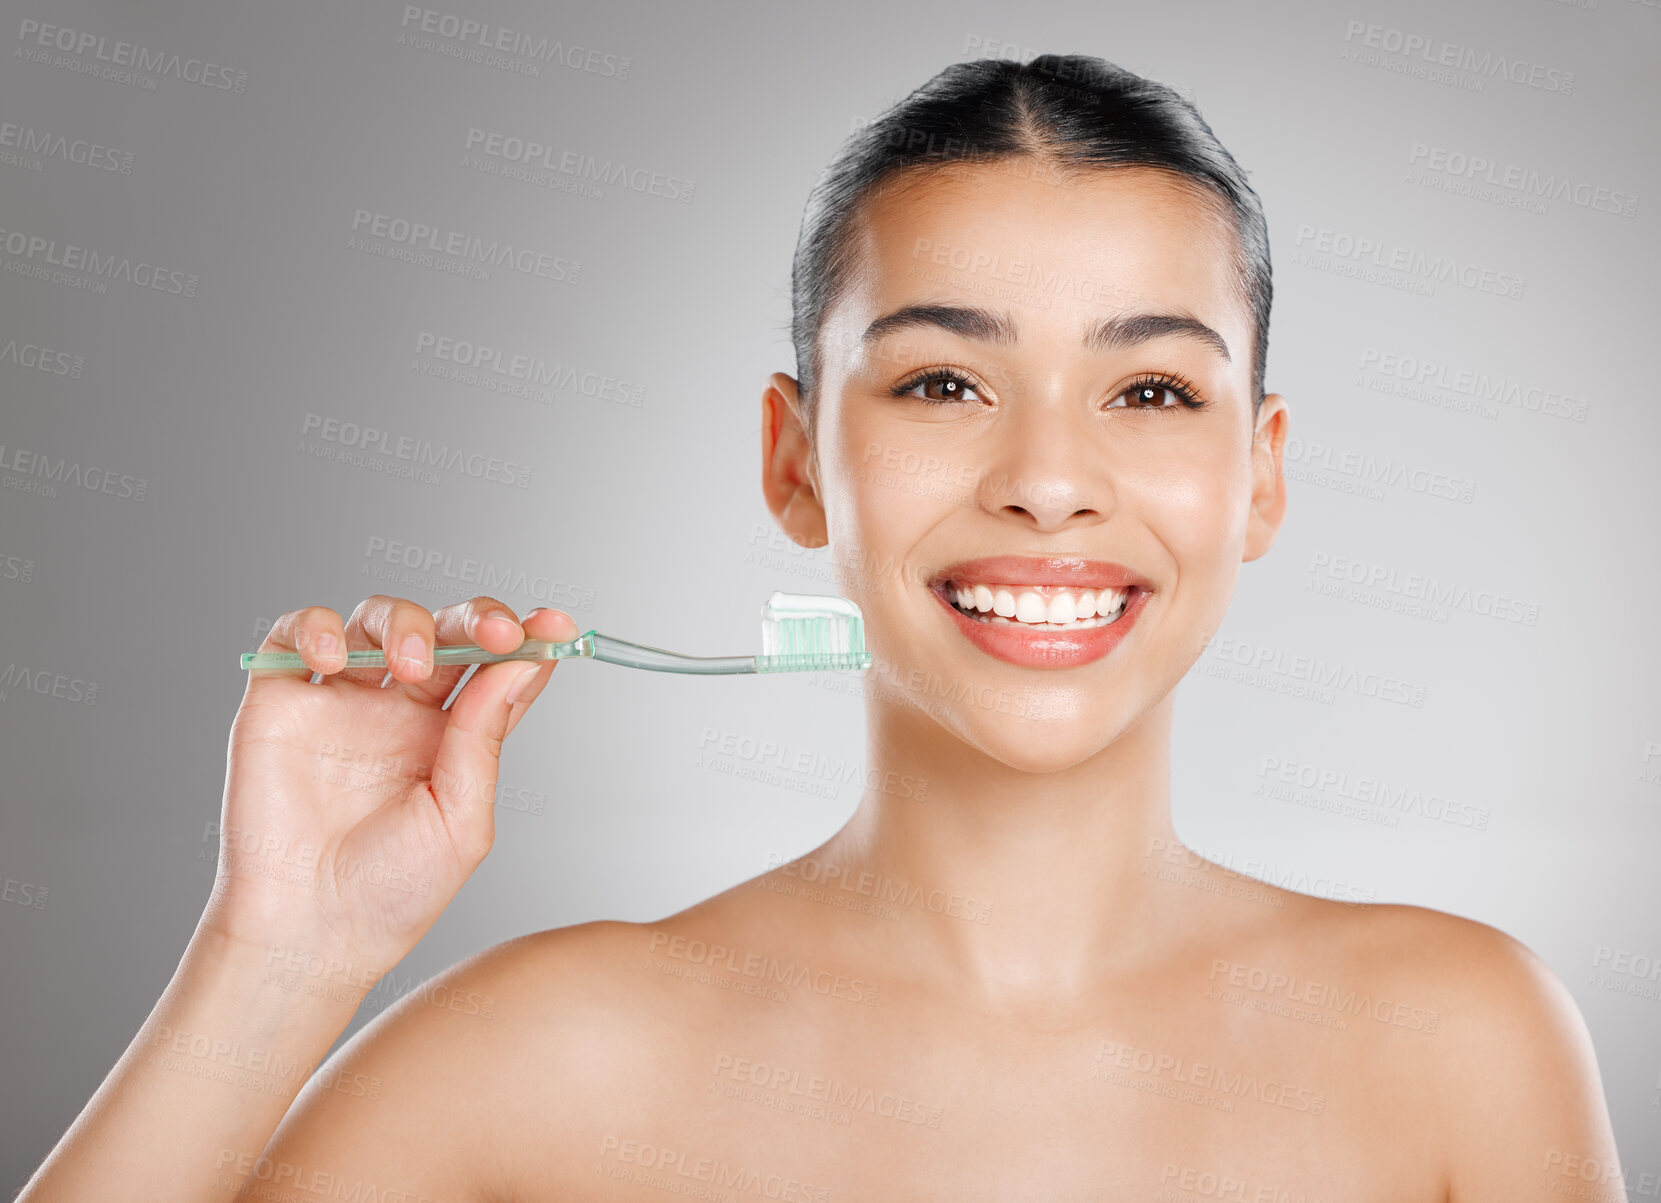 Buy stock photo Studio shot of an attractive young woman brushing her teeth against a grey background